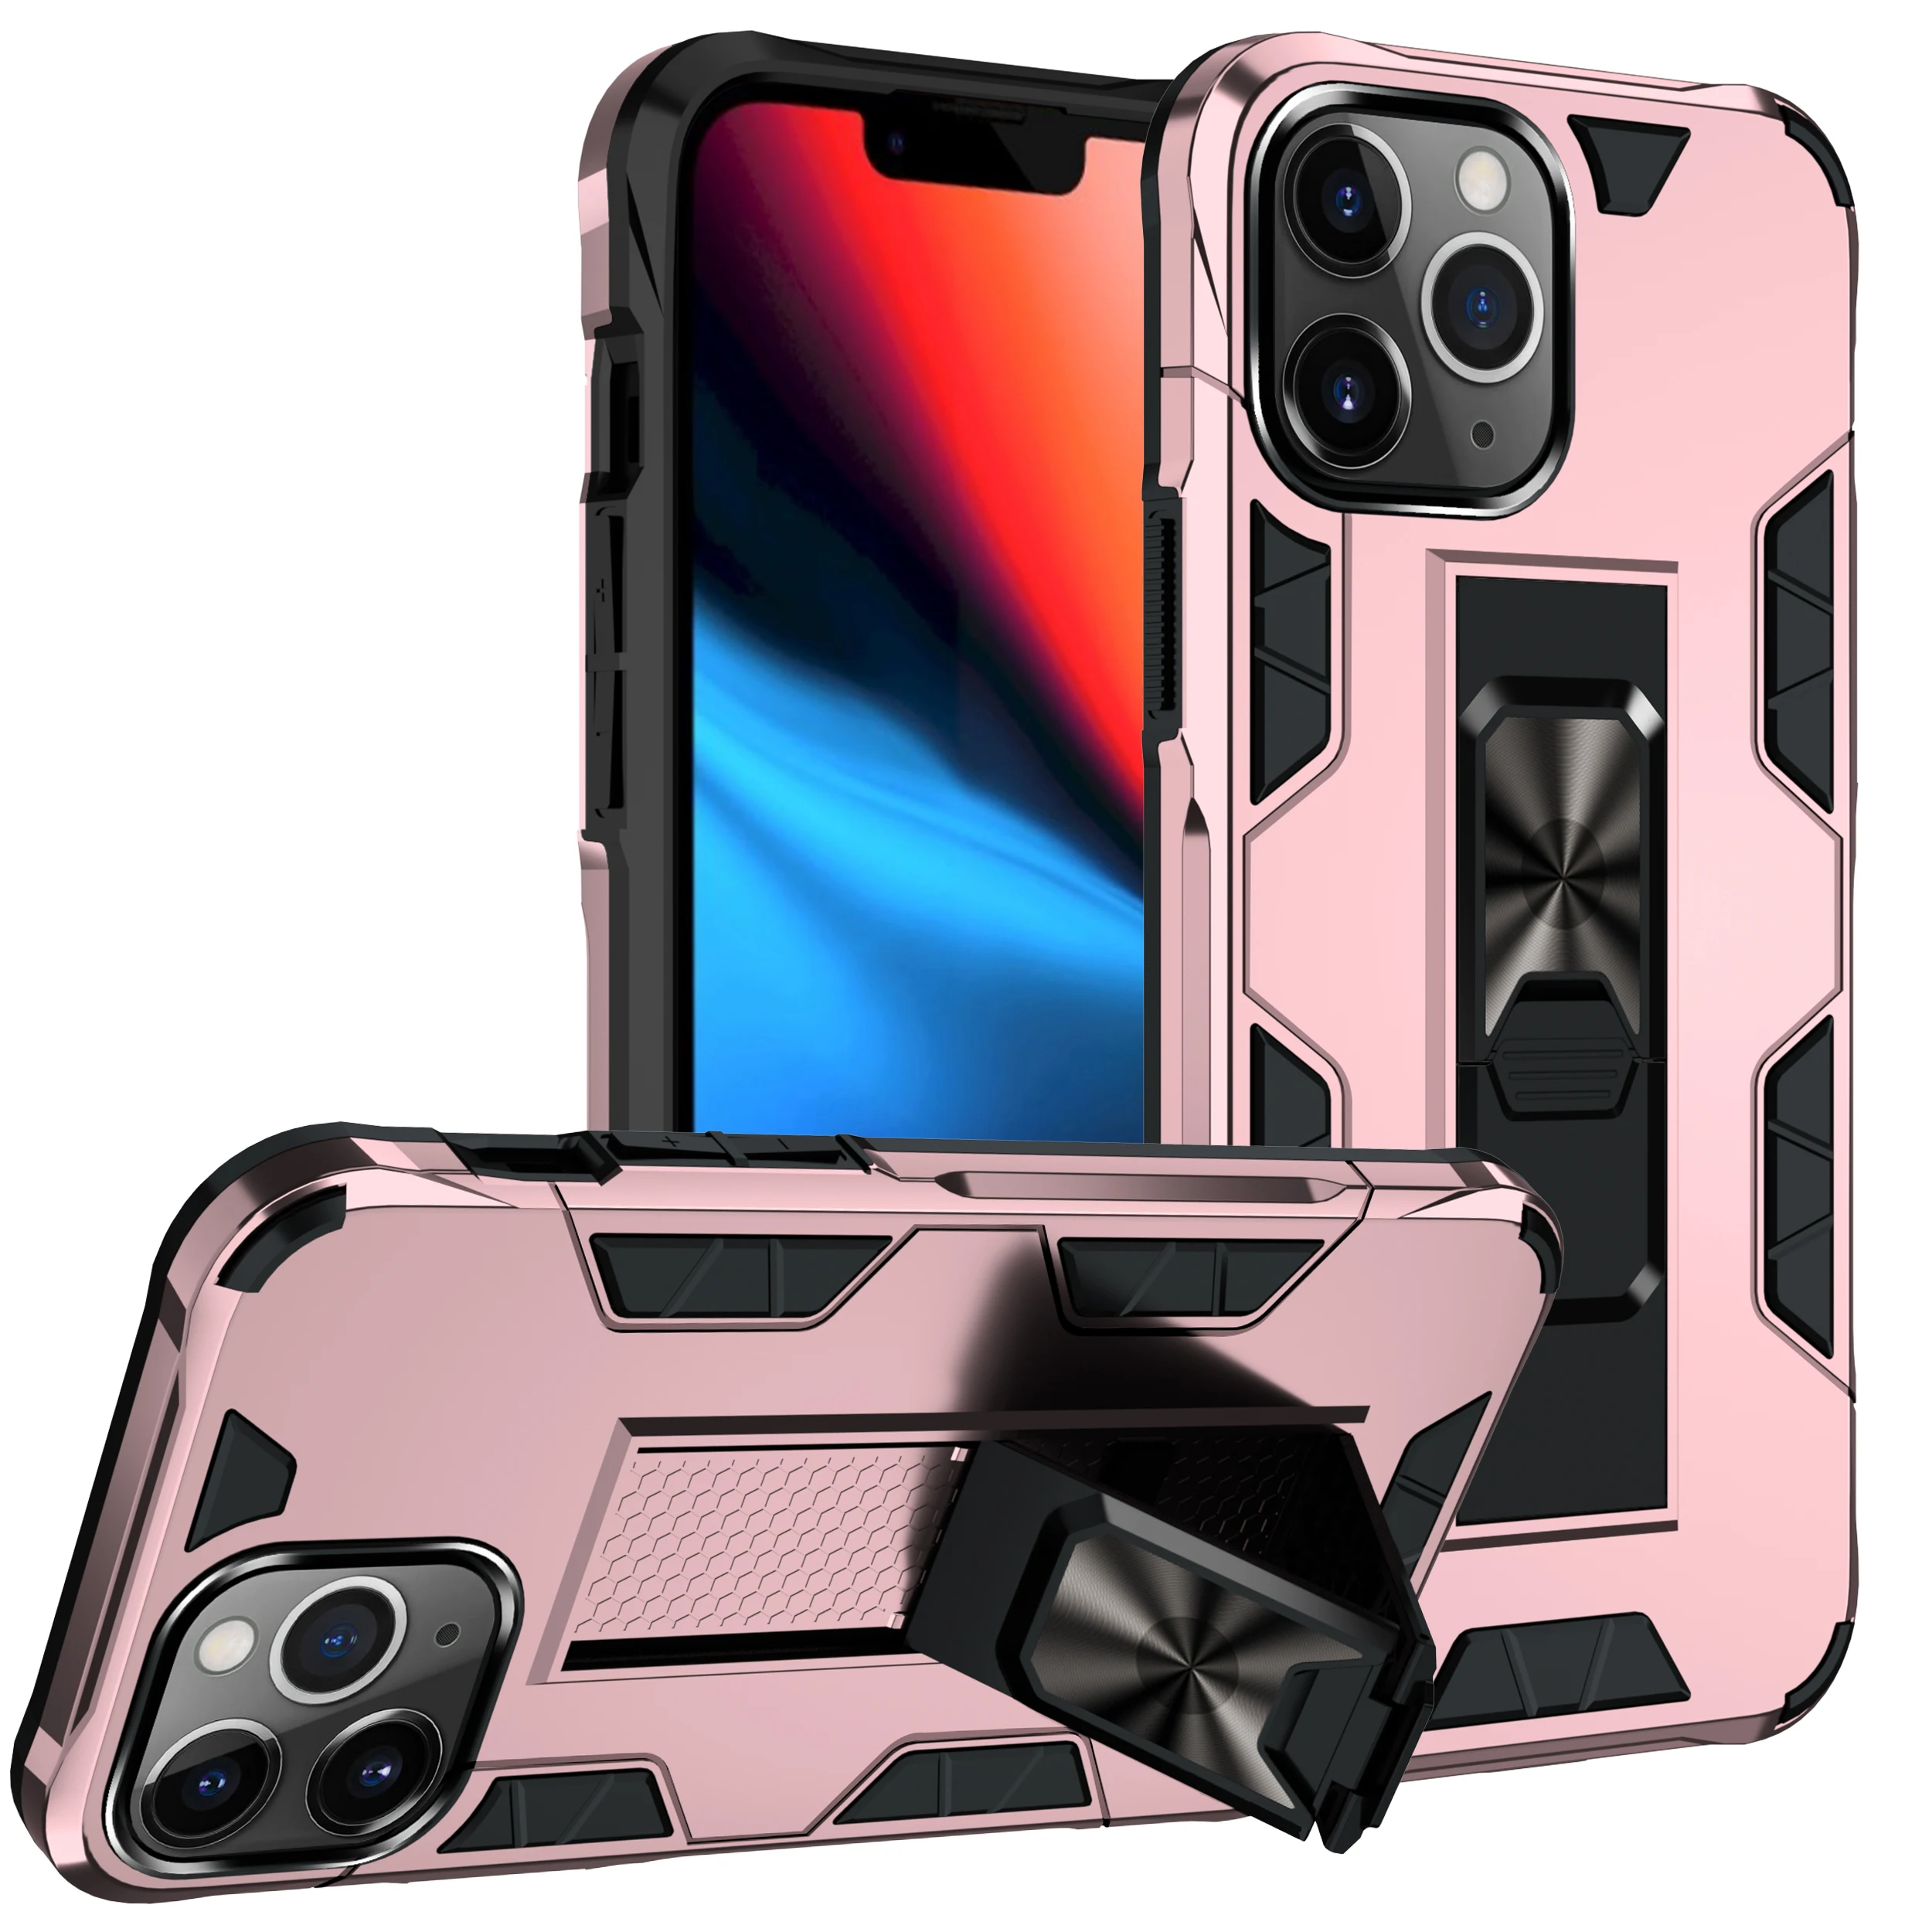 

Luxury Armor Magnetic Metal Ring Case For iPhone 11 12 13 PRO MAX XS XR X 6 7 8 PLUS 6 7 8G SE2020 Stand Holder Coque Capa